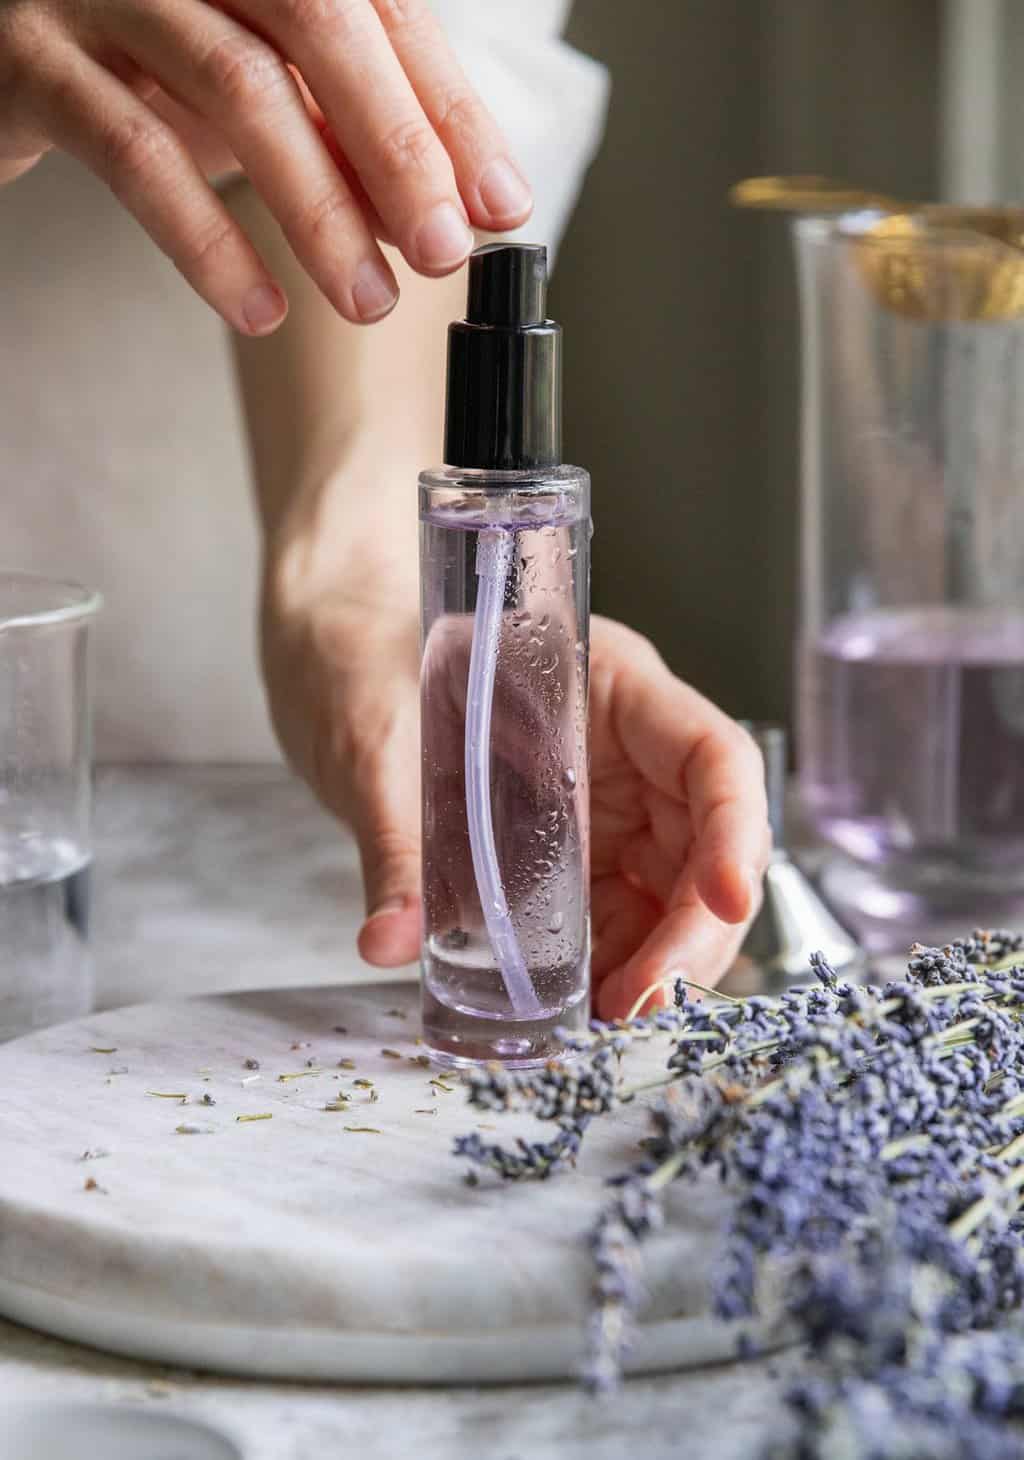 How to make lavender floral water